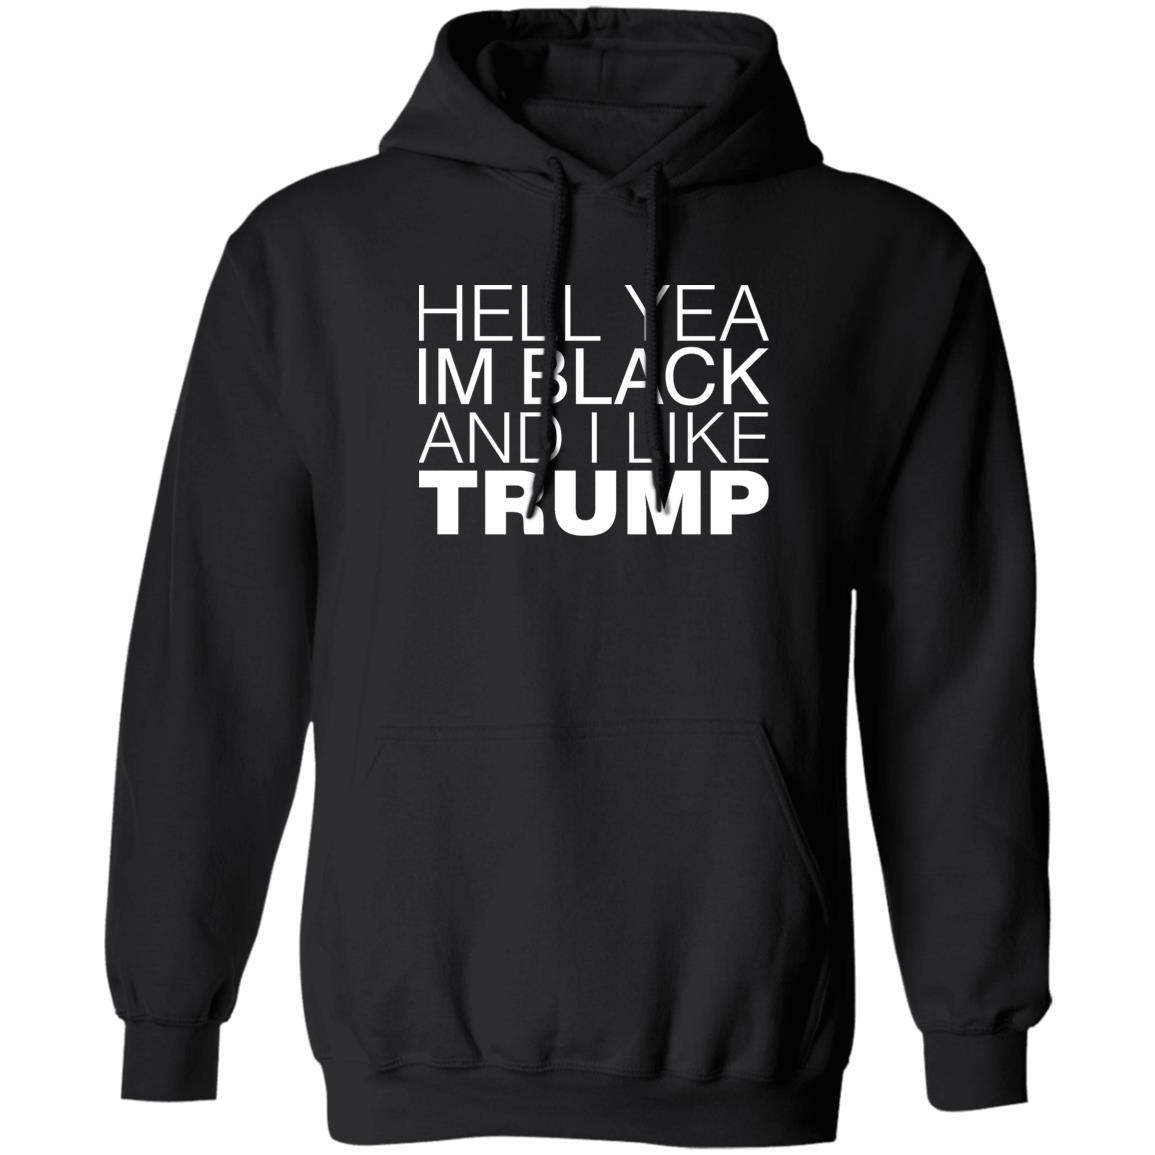 Hell Yea In Black And I Like Trump Shirt Panetory – Graphic Design Apparel &Amp; Accessories Online